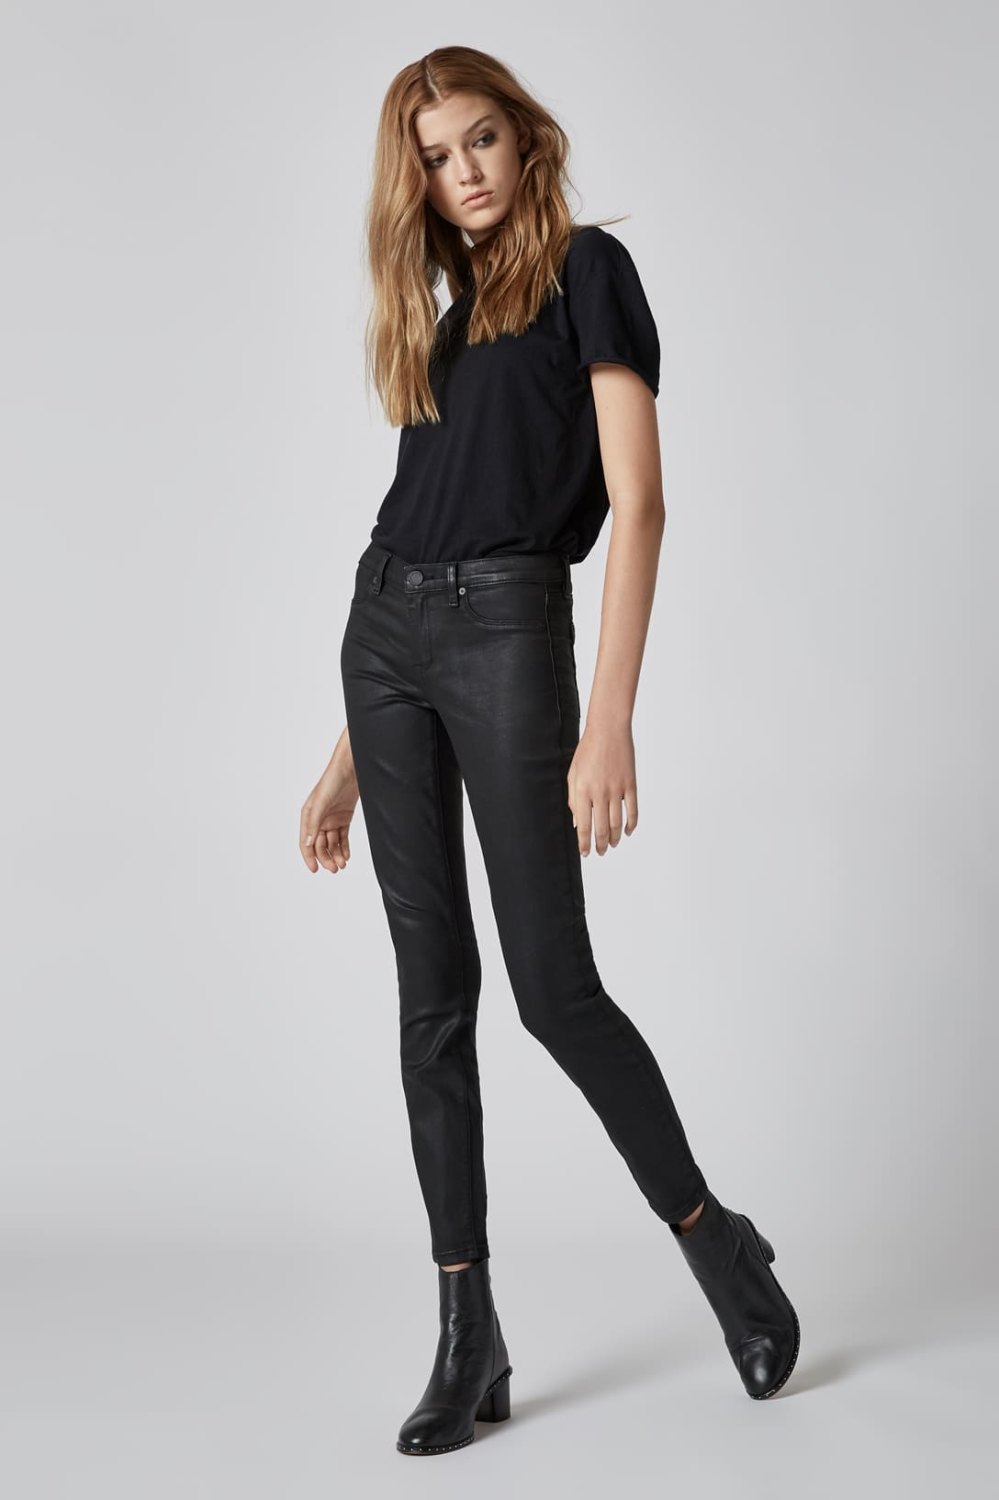 leather pants skinny jeans